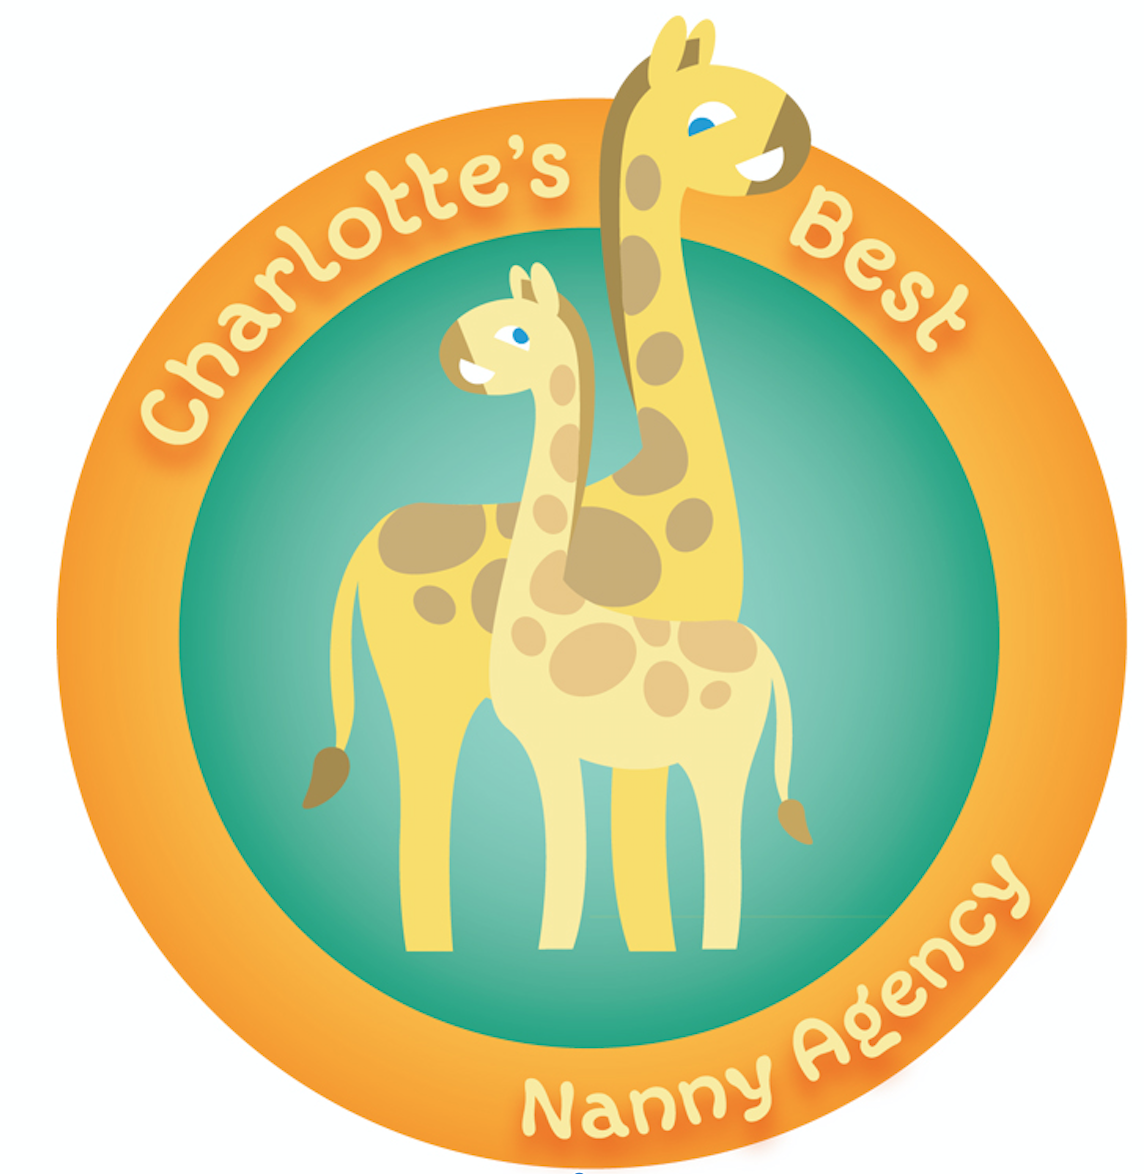 Charlotte’s Best Nanny Agency Families!